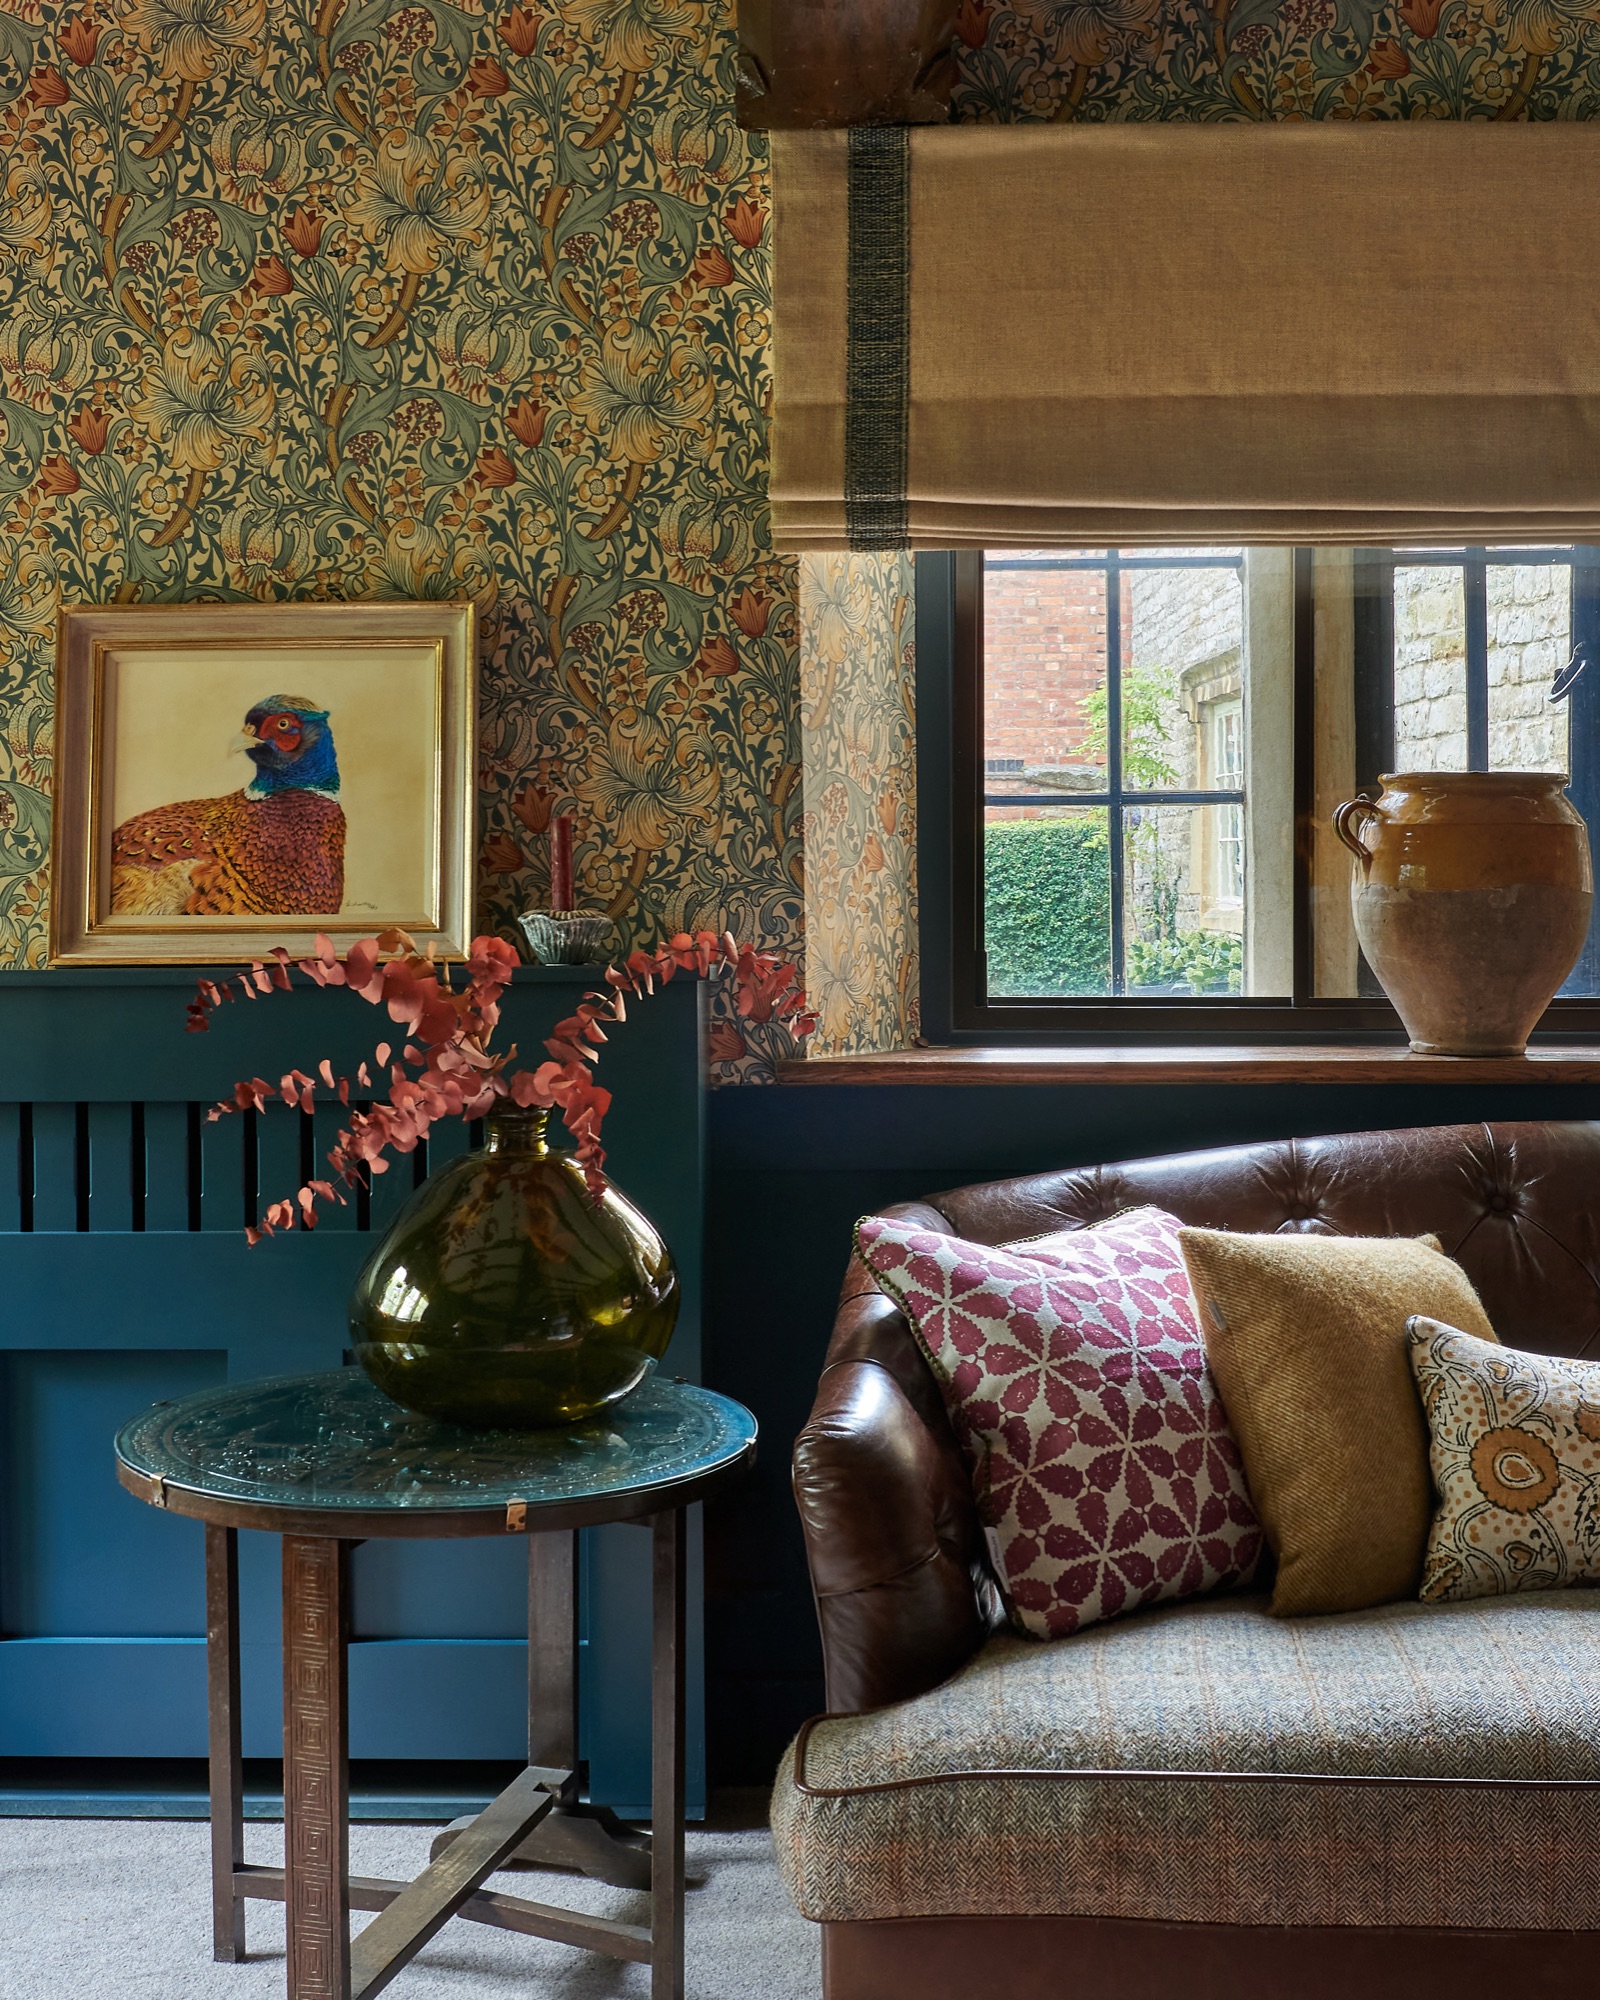 farrow and ball Hague blue snug with William Morris wallpaper, pheasant artwork, Ian main blinds with Samuel and sons trim, tetrad leather sofa with rapture and wright cushions, Linwood cushions, interior styling